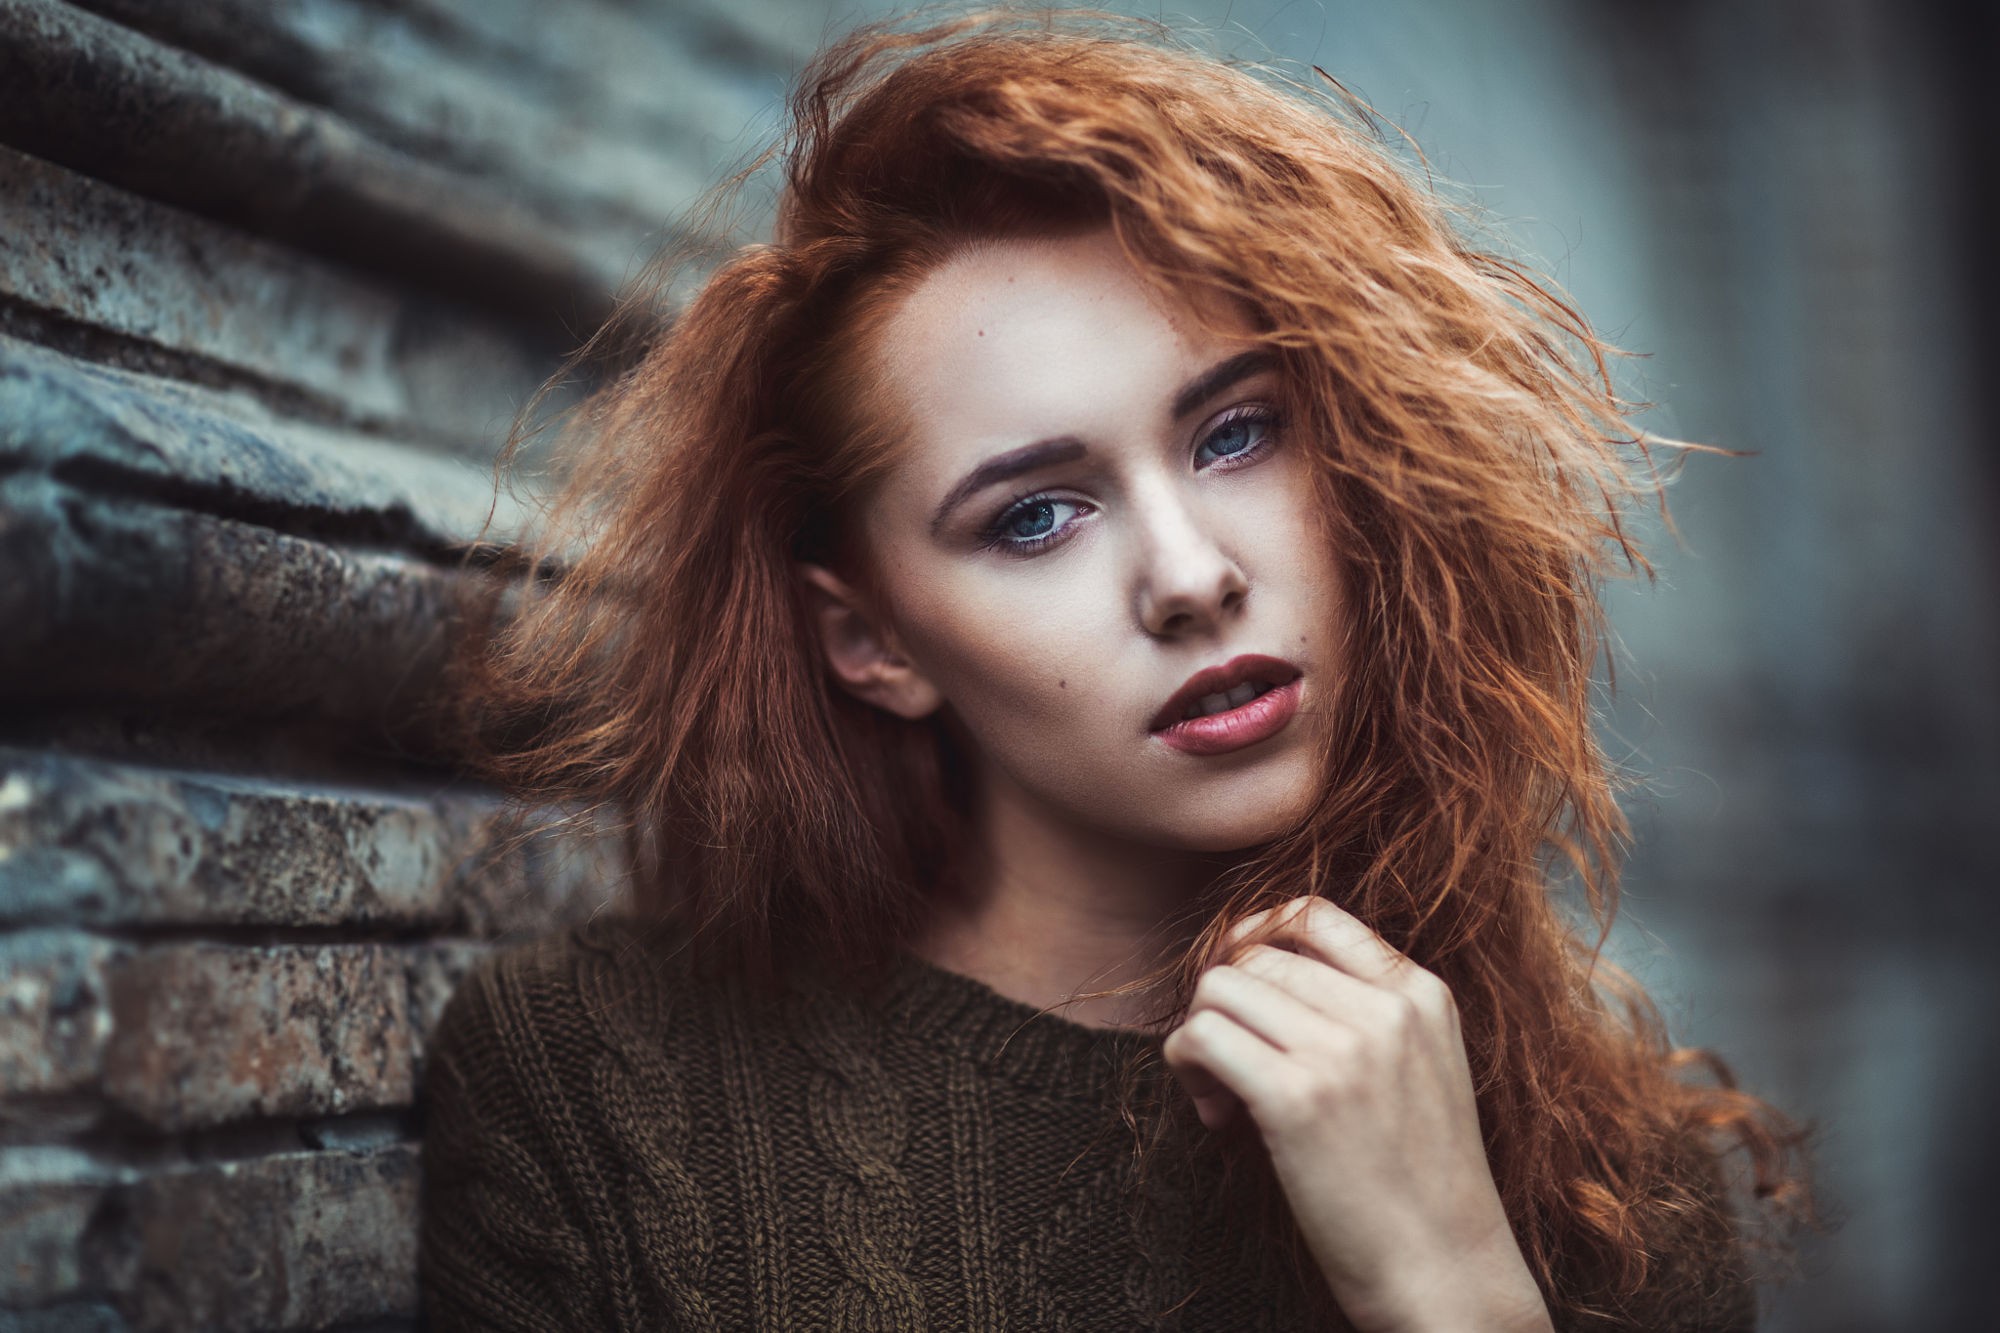 People 2000x1333 redhead women curly hair fingers wall sweater face portrait looking at viewer women outdoors urban brown sweater makeup blue eyes model